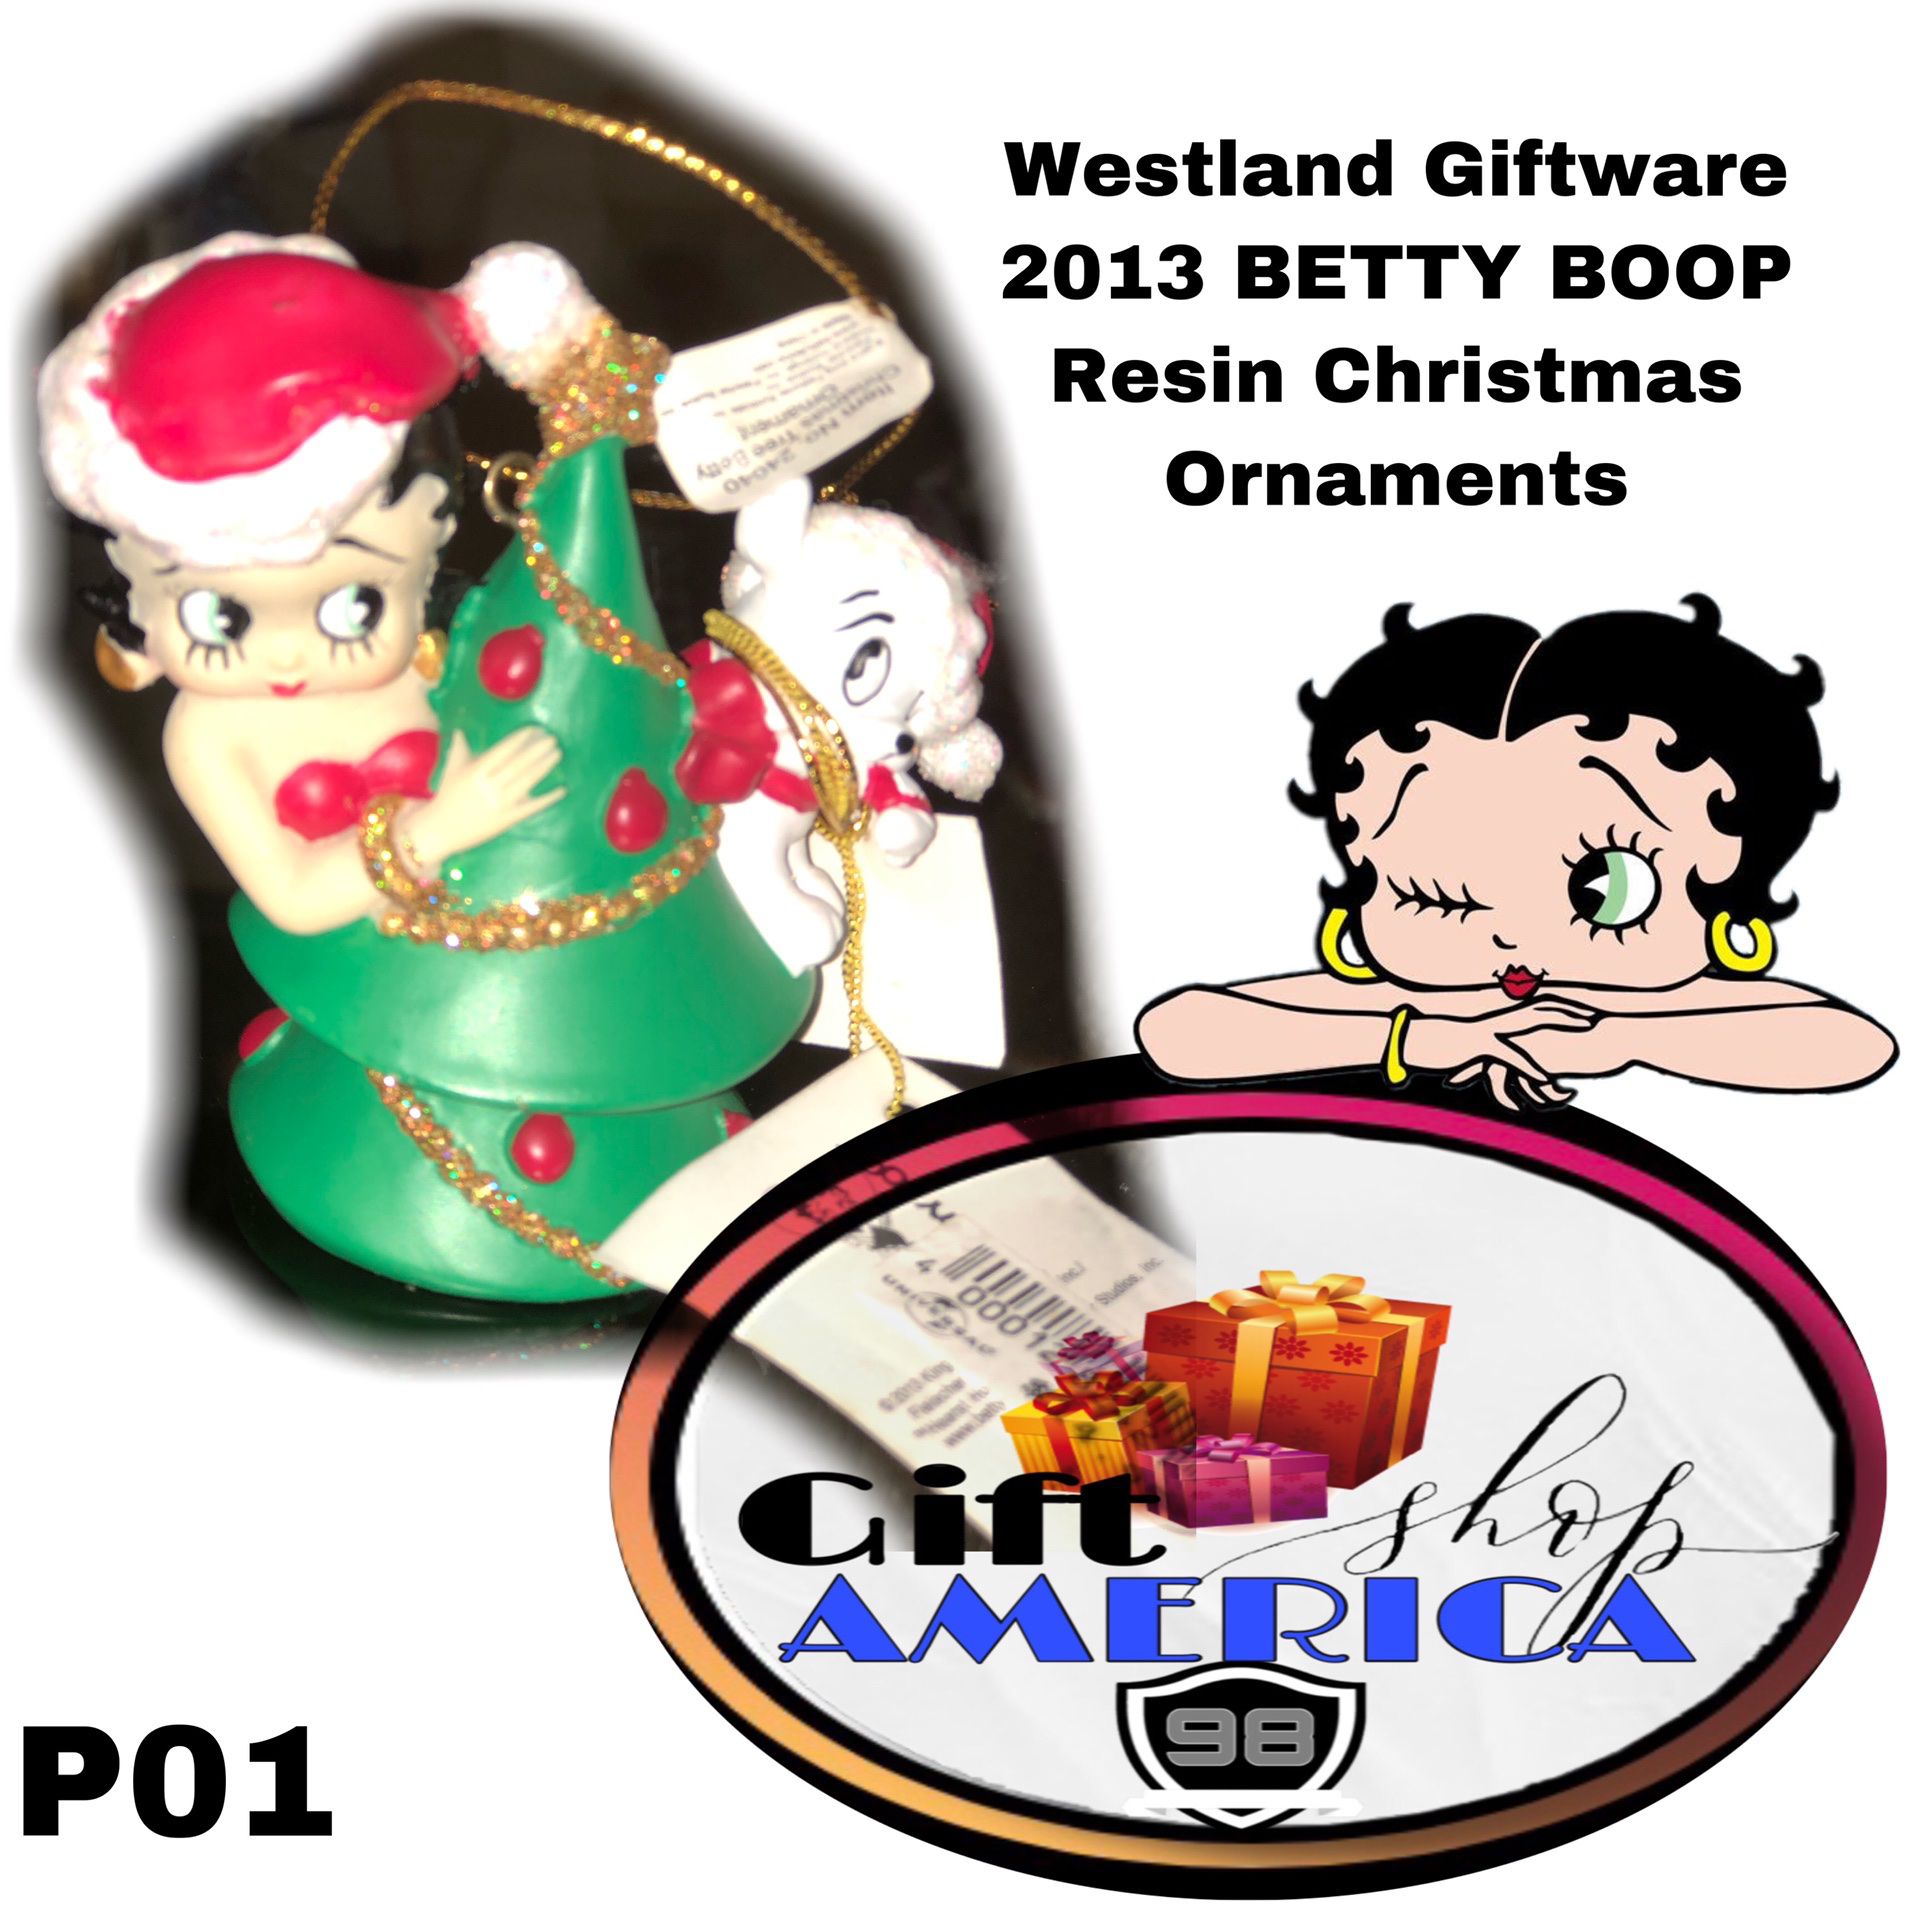 Westland Giftware 2013 BETTY BOOP Resin Christmas Ornaments, P01